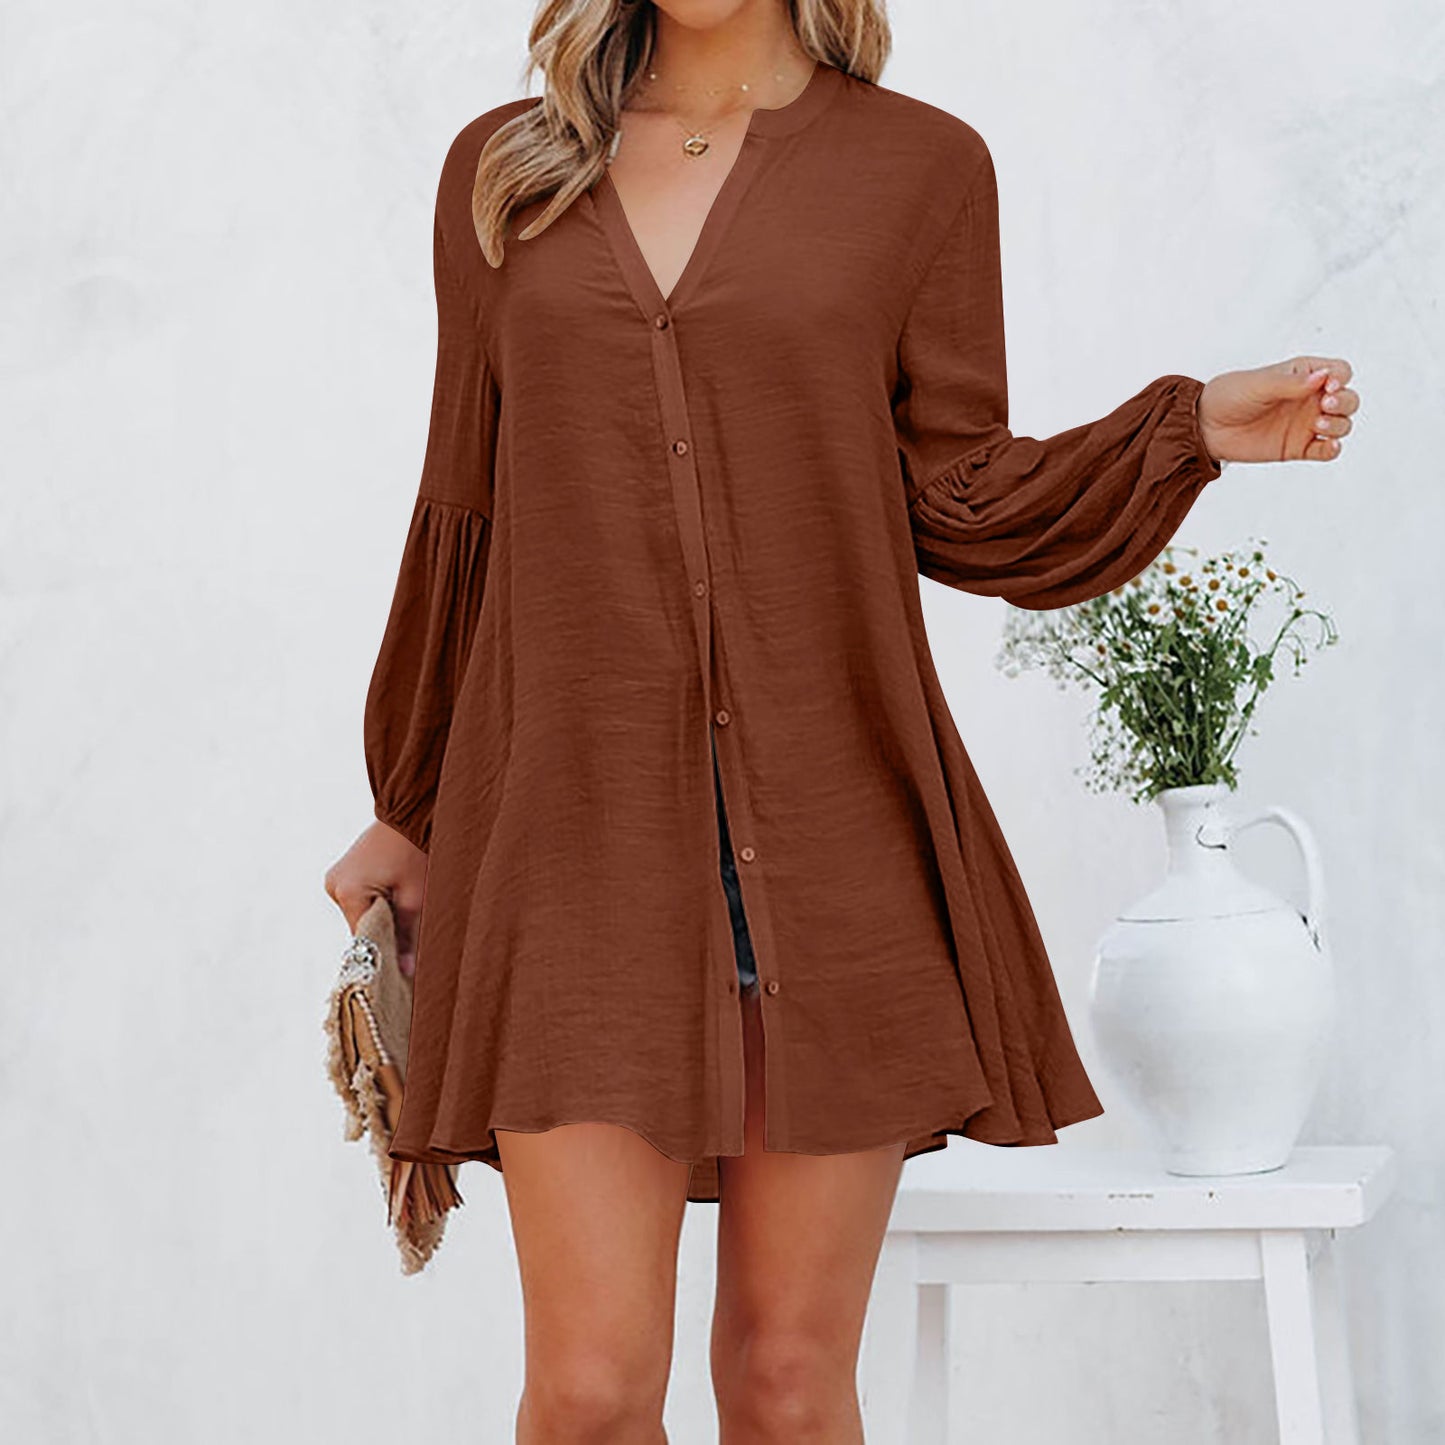 Women's Solid Color Stitching Casual Loose Cardigan Button T-shirt